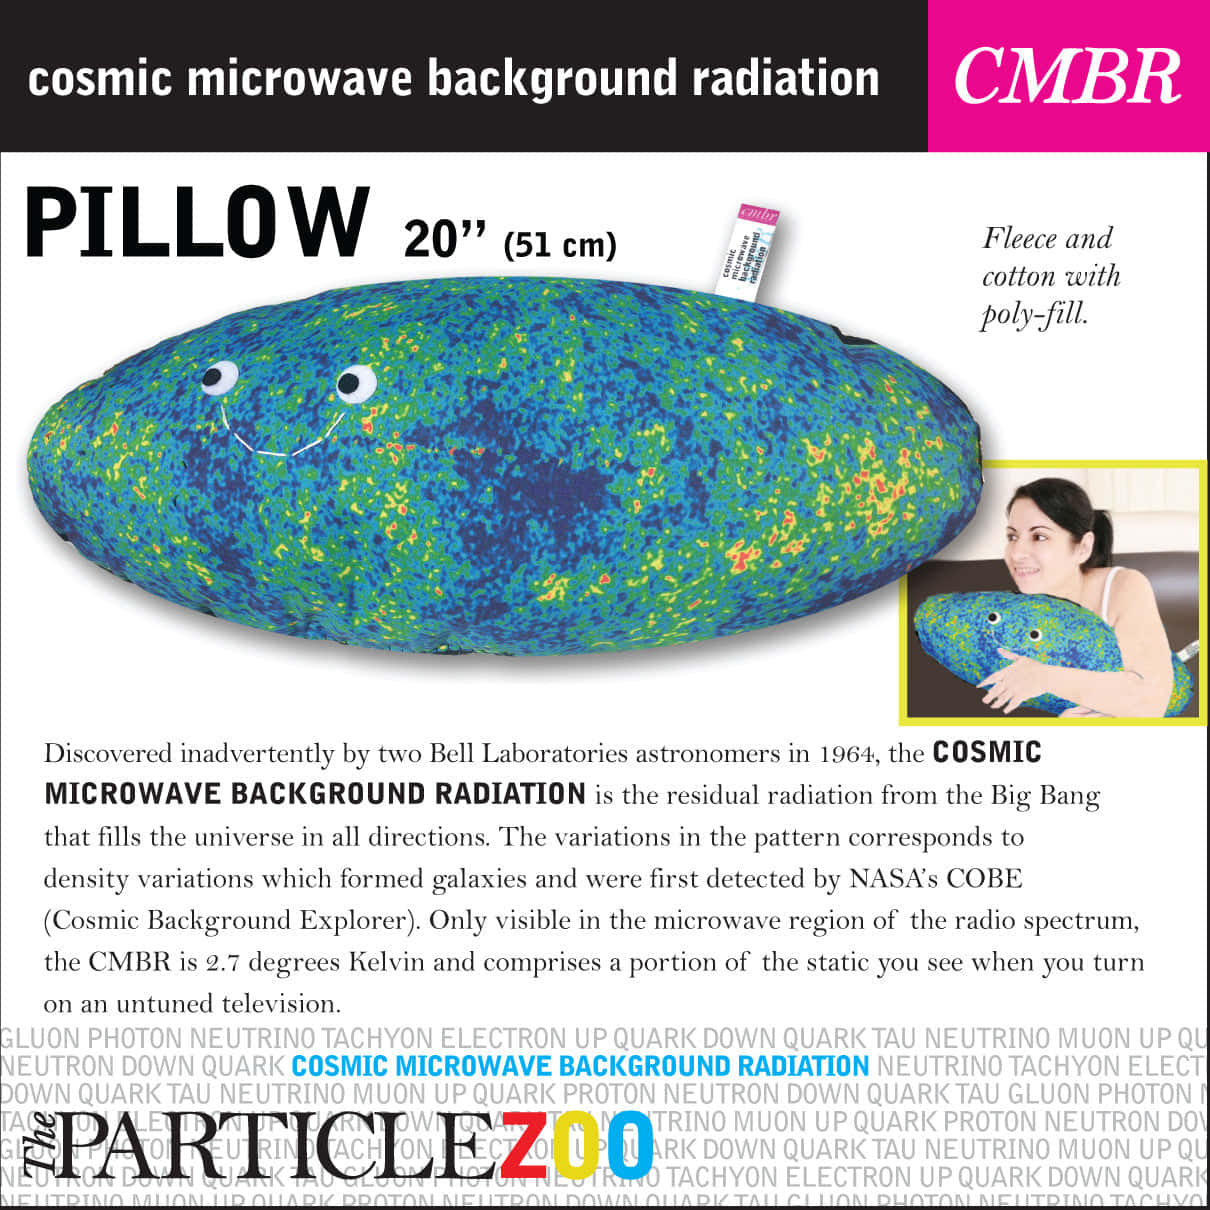 "Gazing at the Universe's Cosmic Microwave Background"